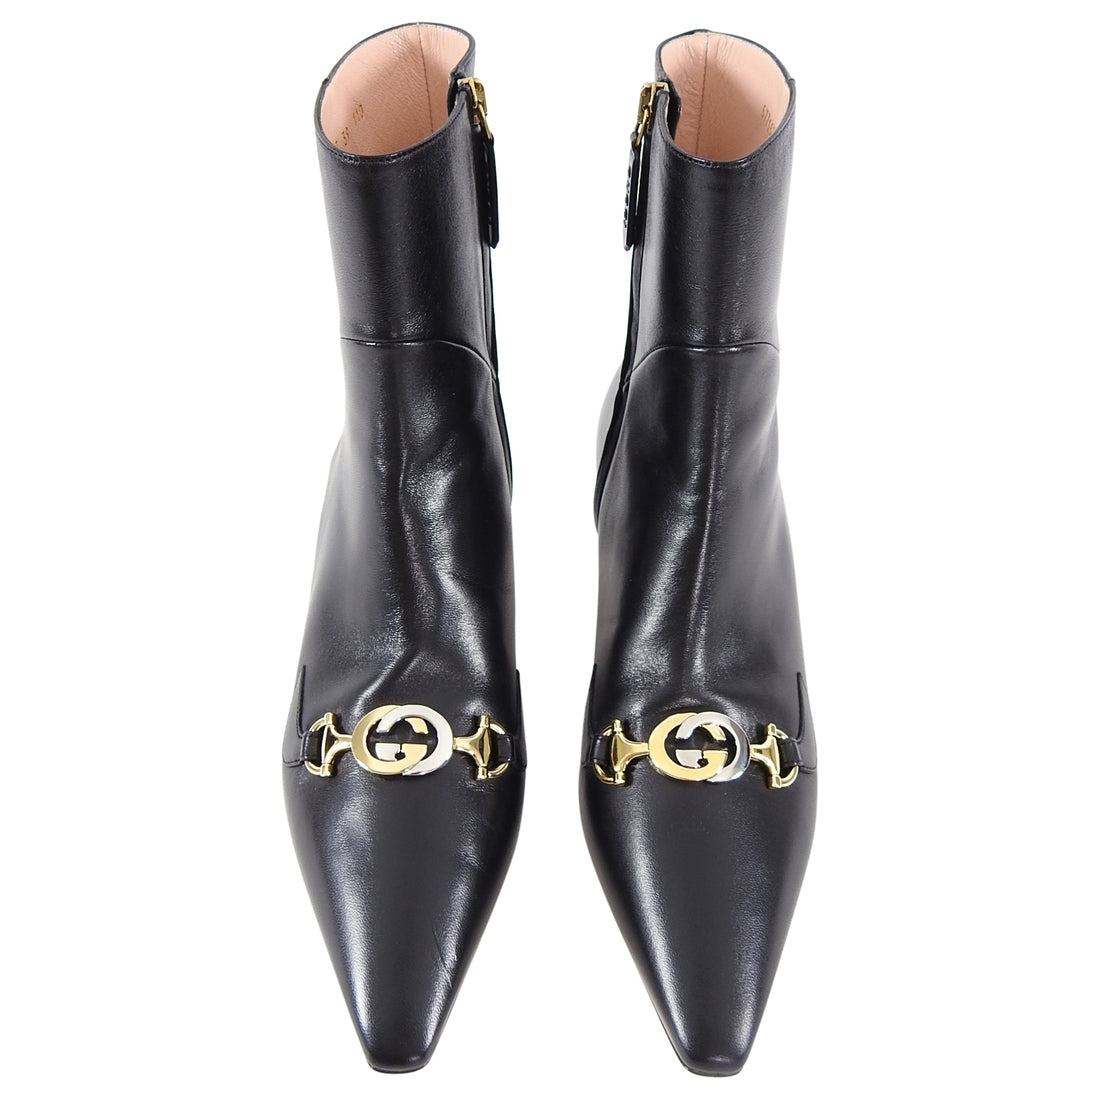 Gucci Zumi Black Leather GG Logo Ankle Boots - 39 / 8.5